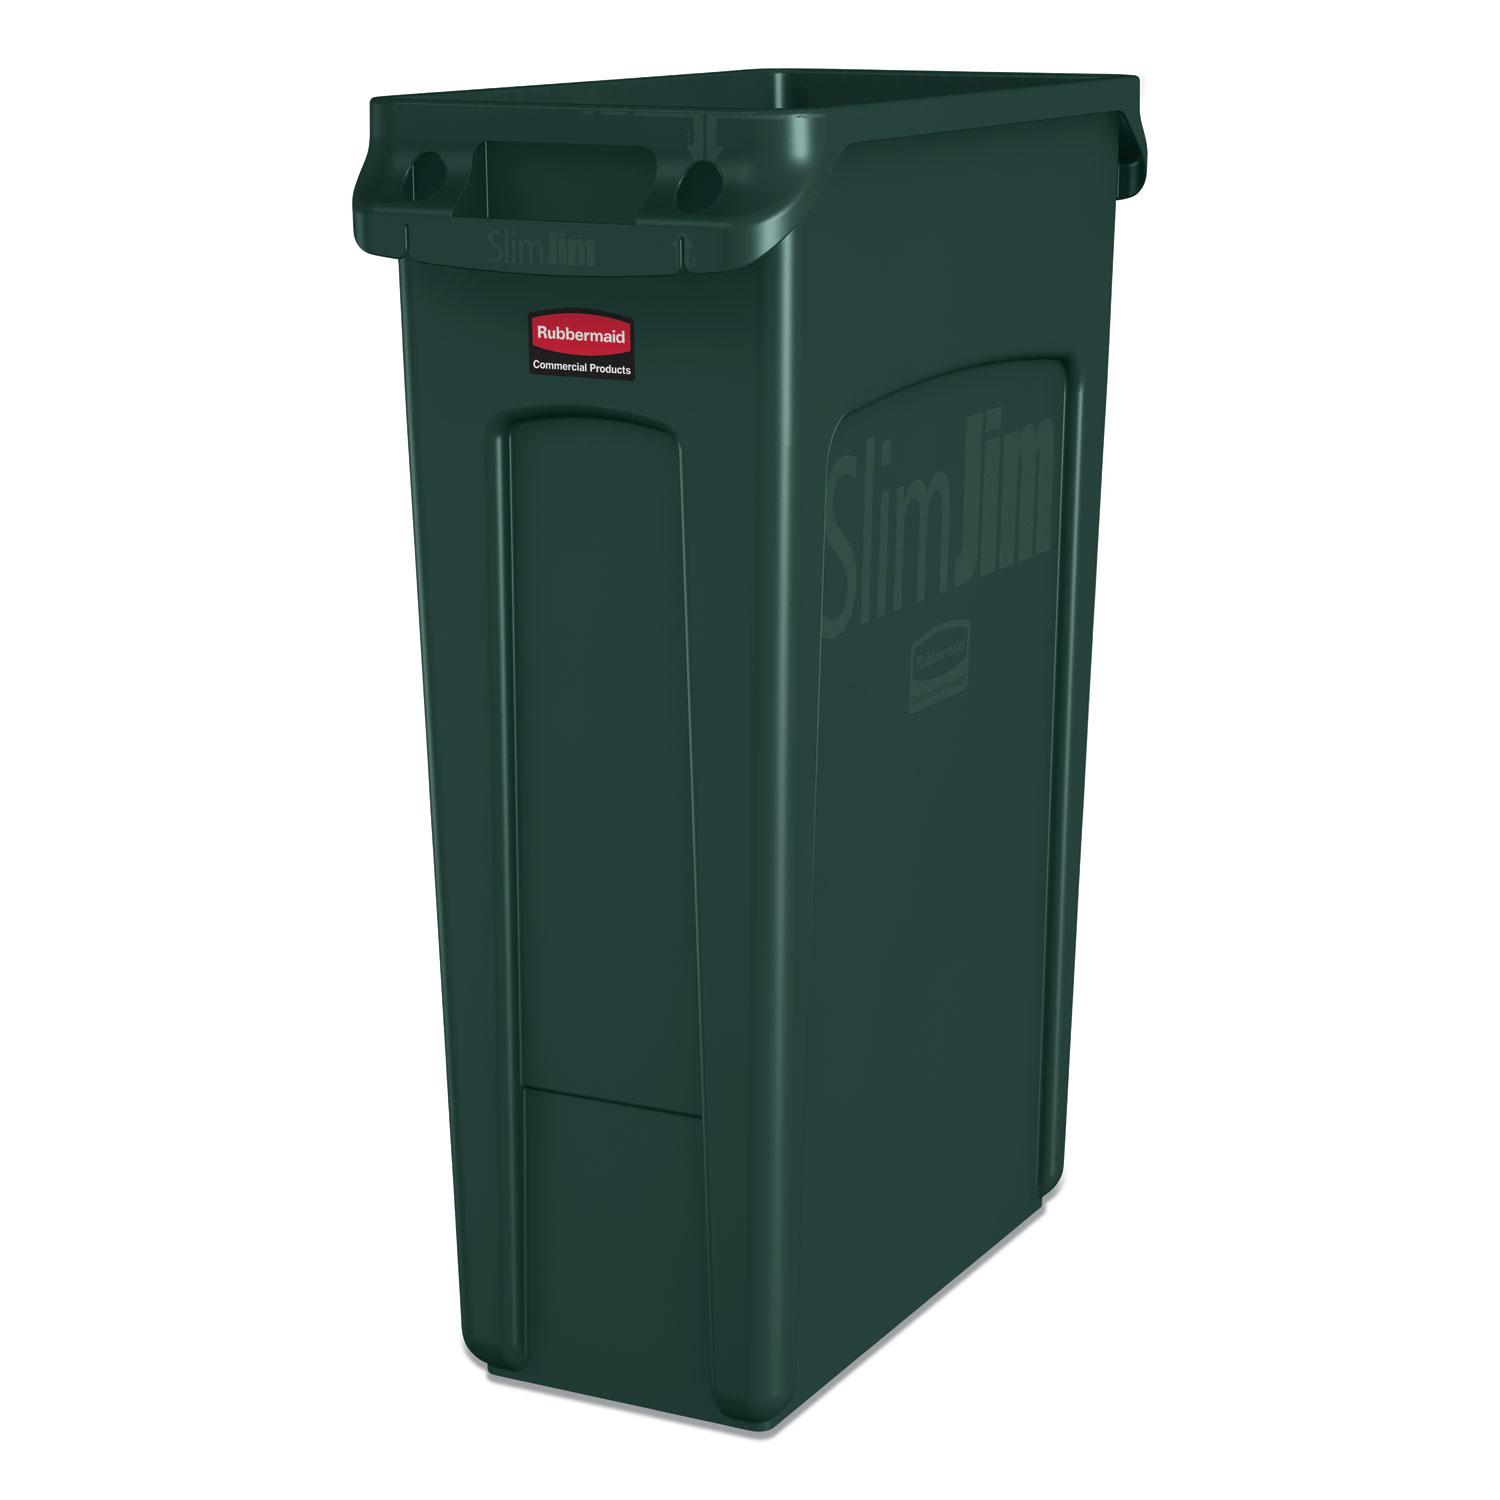  Rubbermaid Commercial 1956186 Slim Jim Receptacle with Venting Channels, Rectangular, Plastic, 23 gal, Dark Green (RCP1956186) 